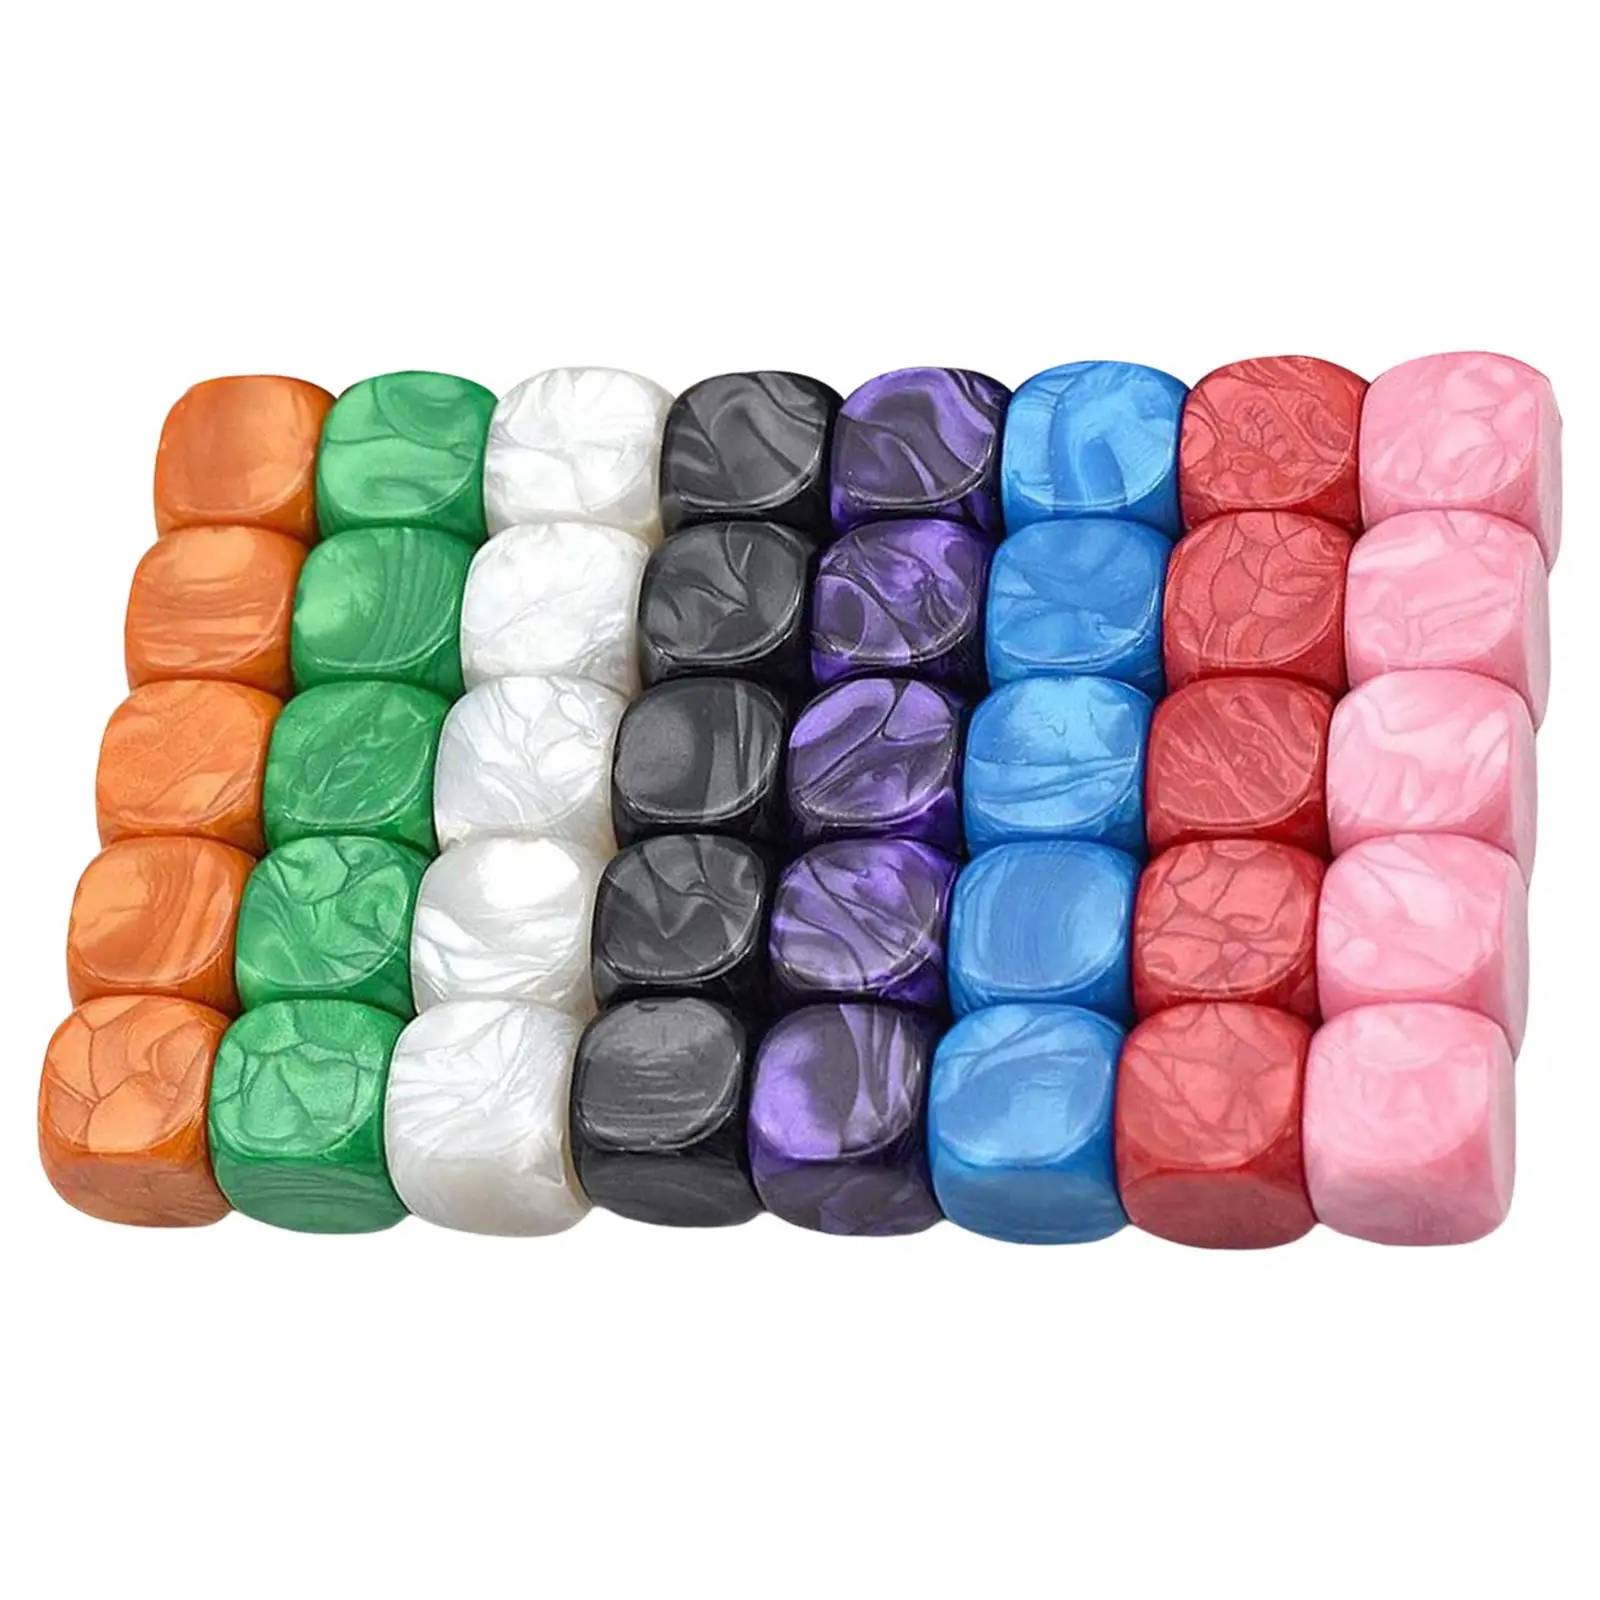 Acrylic 16mm Blank Dices for Math Counting Teaching, Party Supplies, Dices Making, Board Game Accessories, DIY Sticker